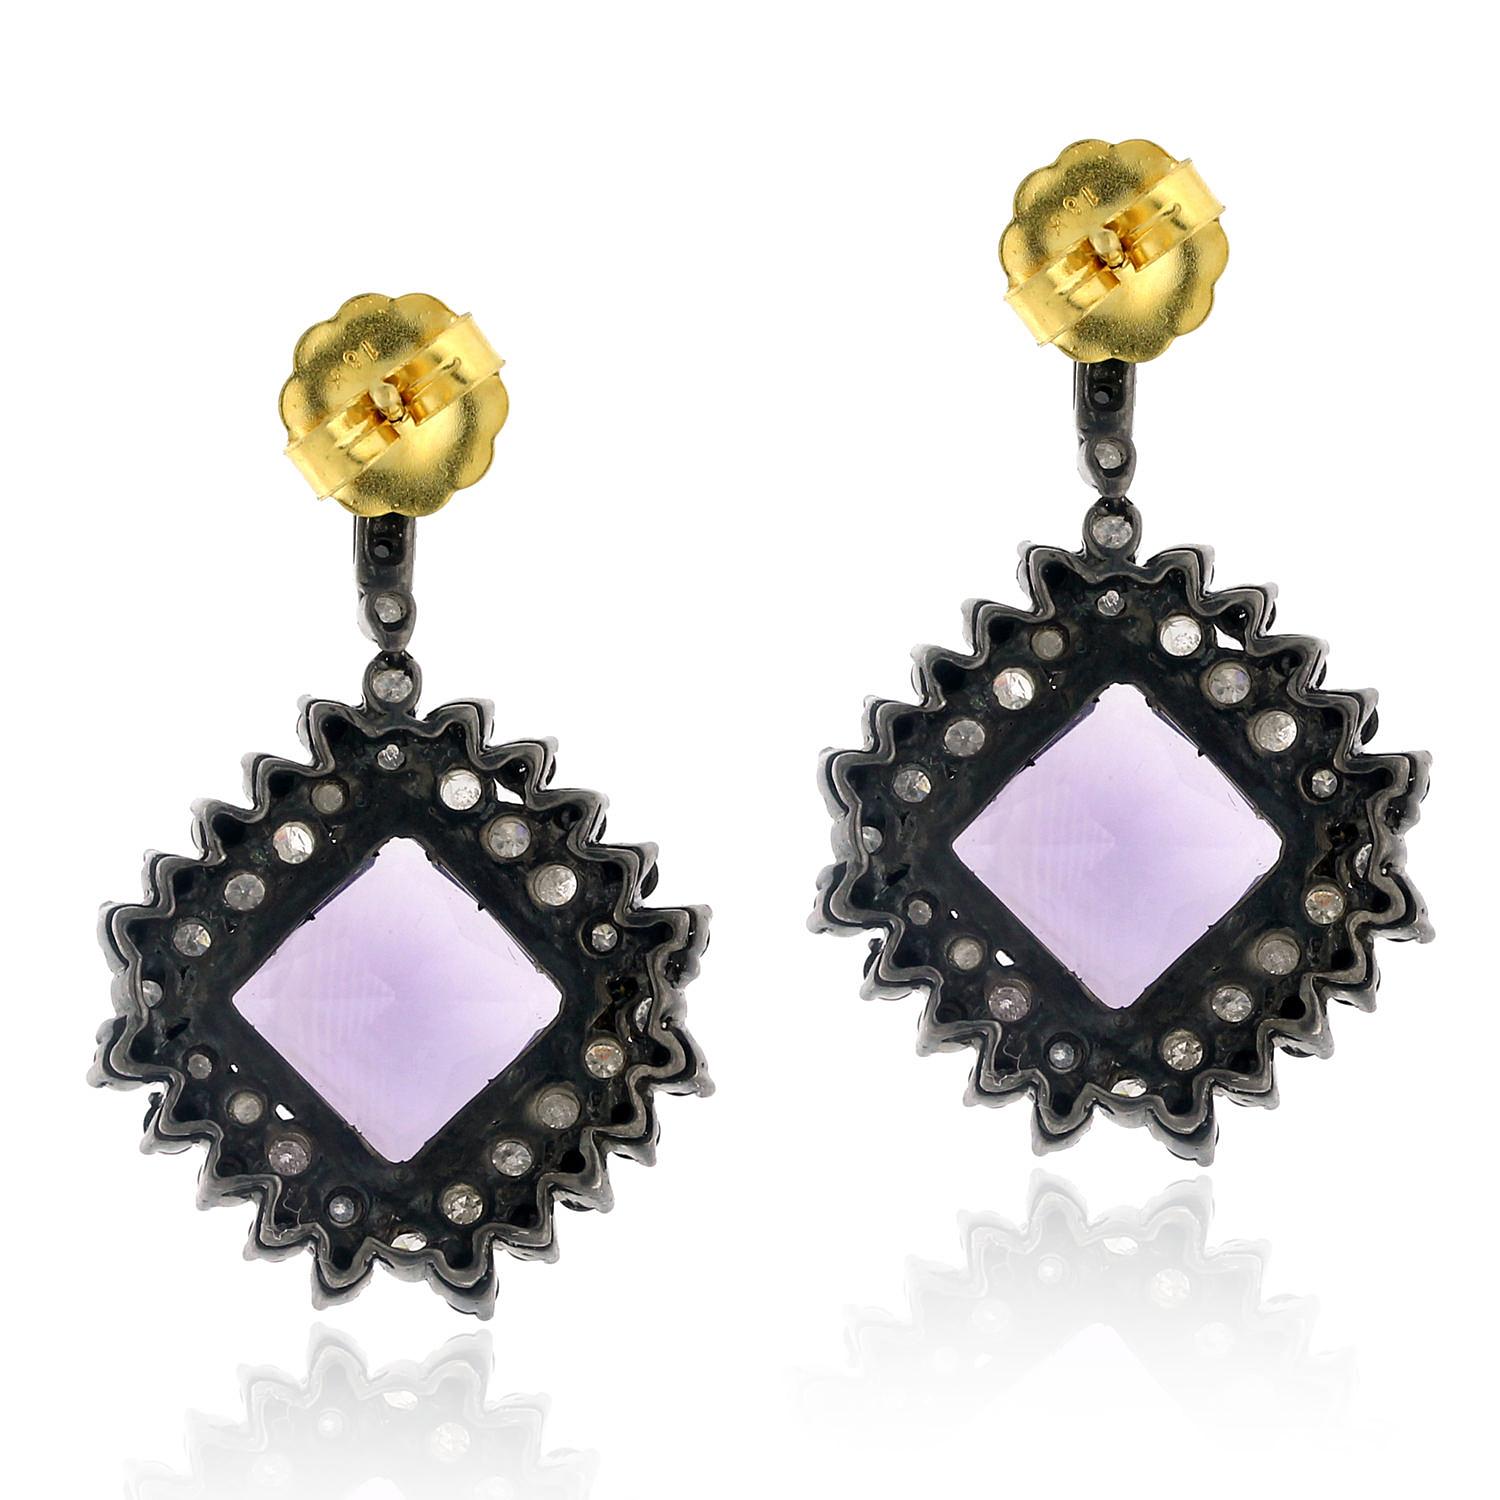 15.25cts Amethyst drop earring with Black and White Diamond in silver and gold is cool and very attractive.

Closure: Push Post

18kt gold: 1.98gms
Diamond: 3.74cts
Silver: 11.52gms
Amethyst: 15.25cts
